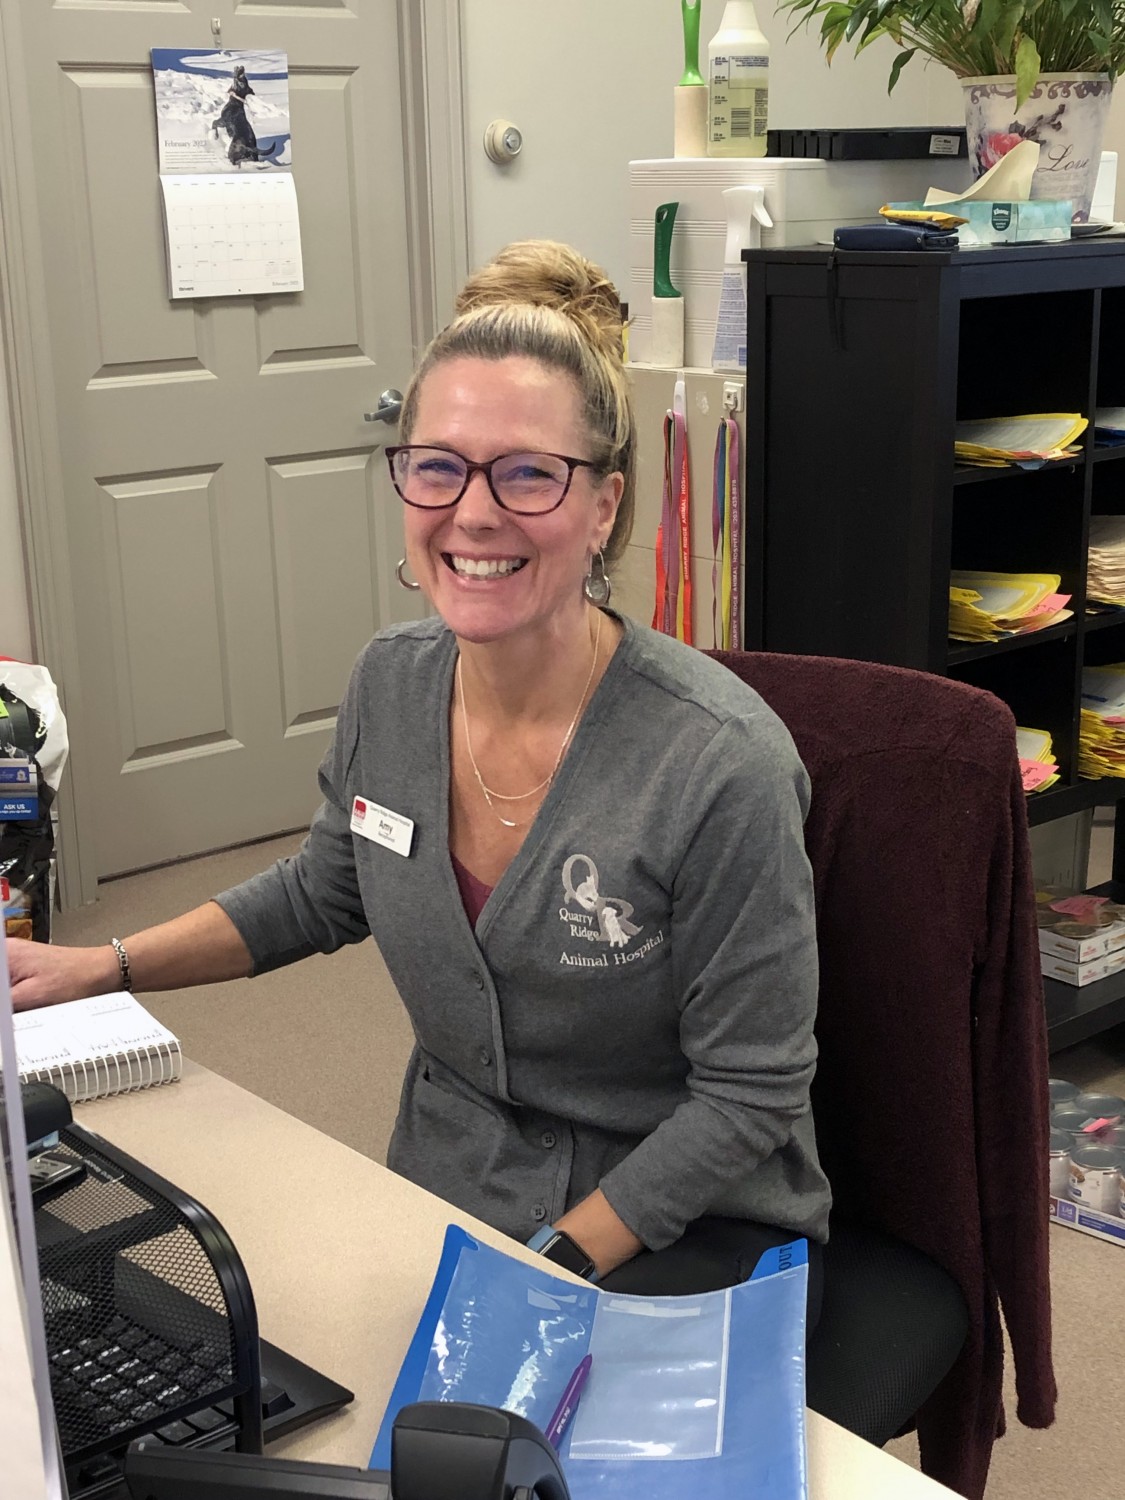 Amy is a Receptionist at Quarry Ridge Animal Hospital